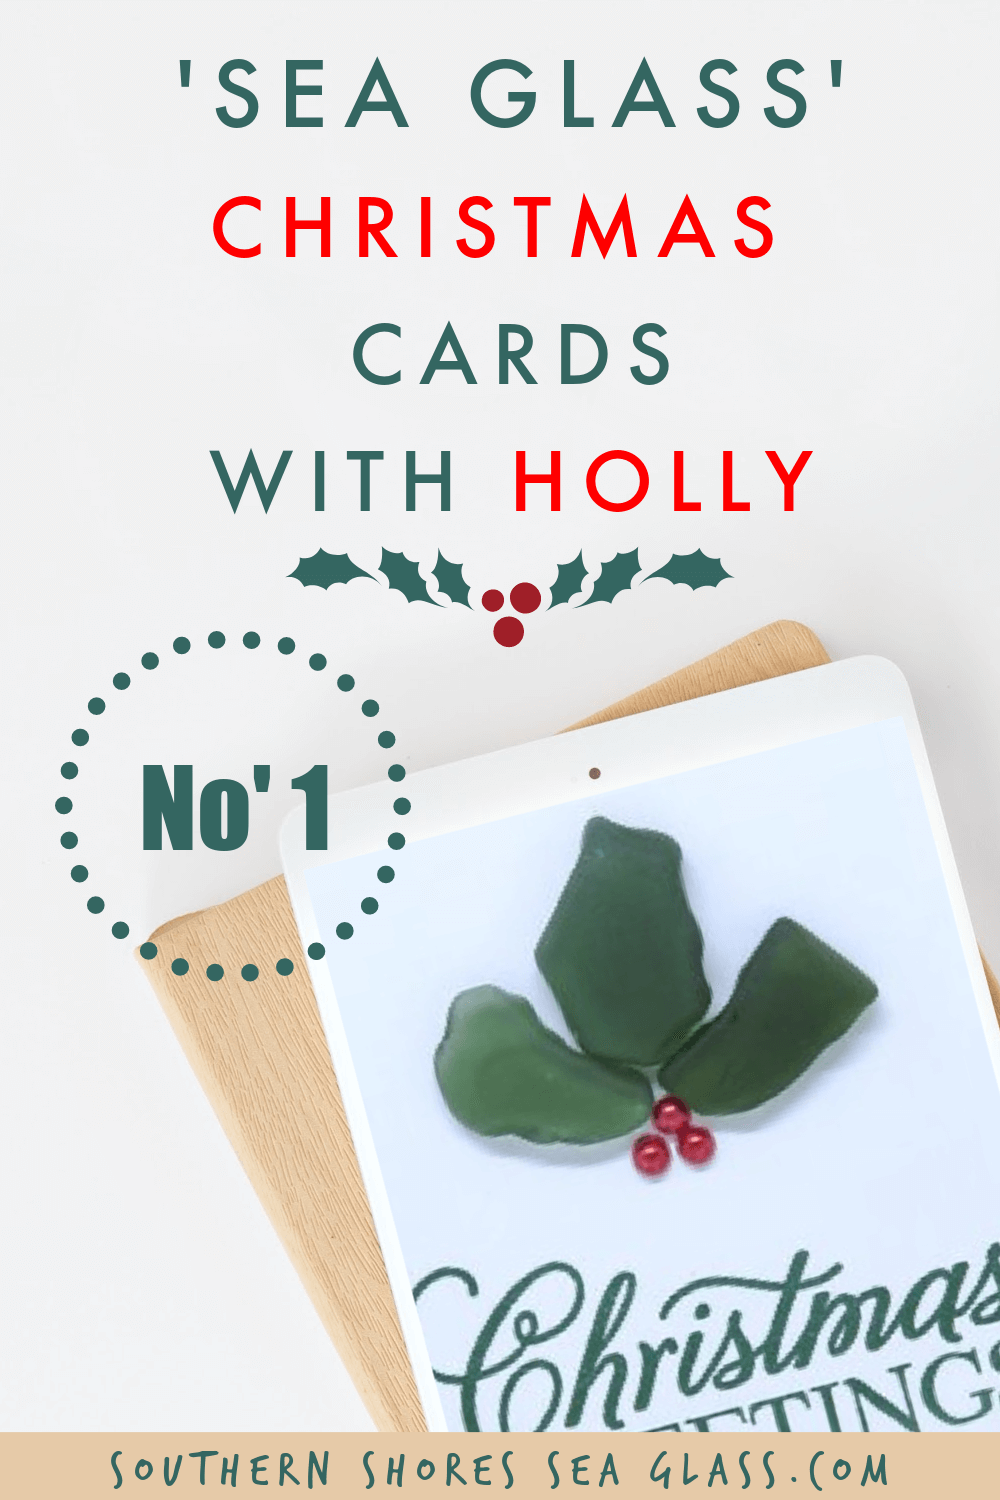 Christmas Cards with Holly created for family and friends and made using your own personally collected sea glass found on your sea glass beachcombing adventures